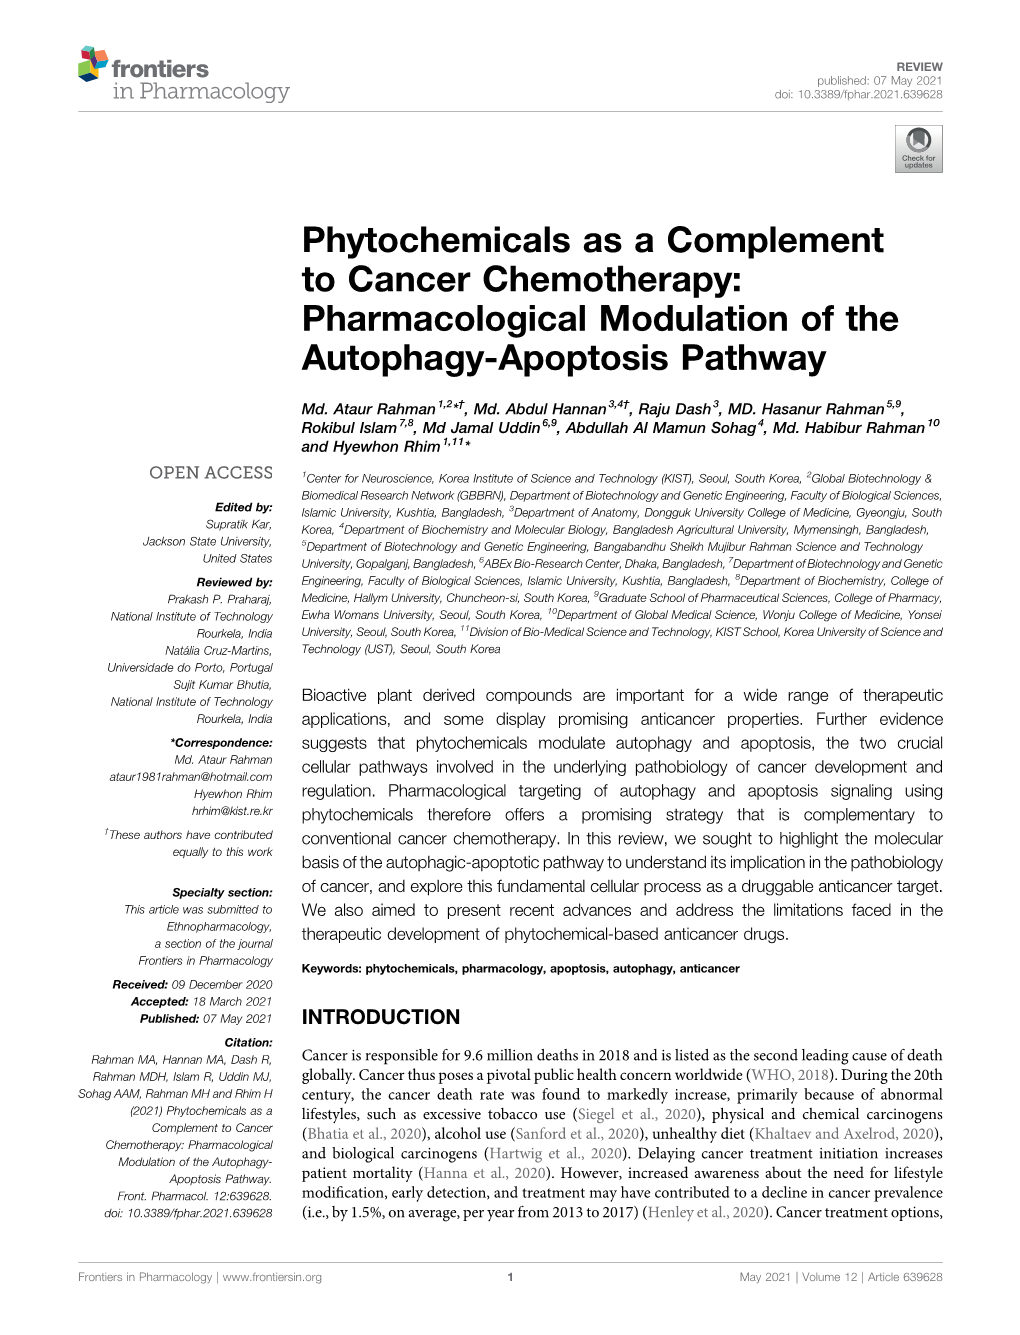 Phytochemicals As a Complement to Cancer Chemotherapy: Pharmacological Modulation of the Autophagy-Apoptosis Pathway